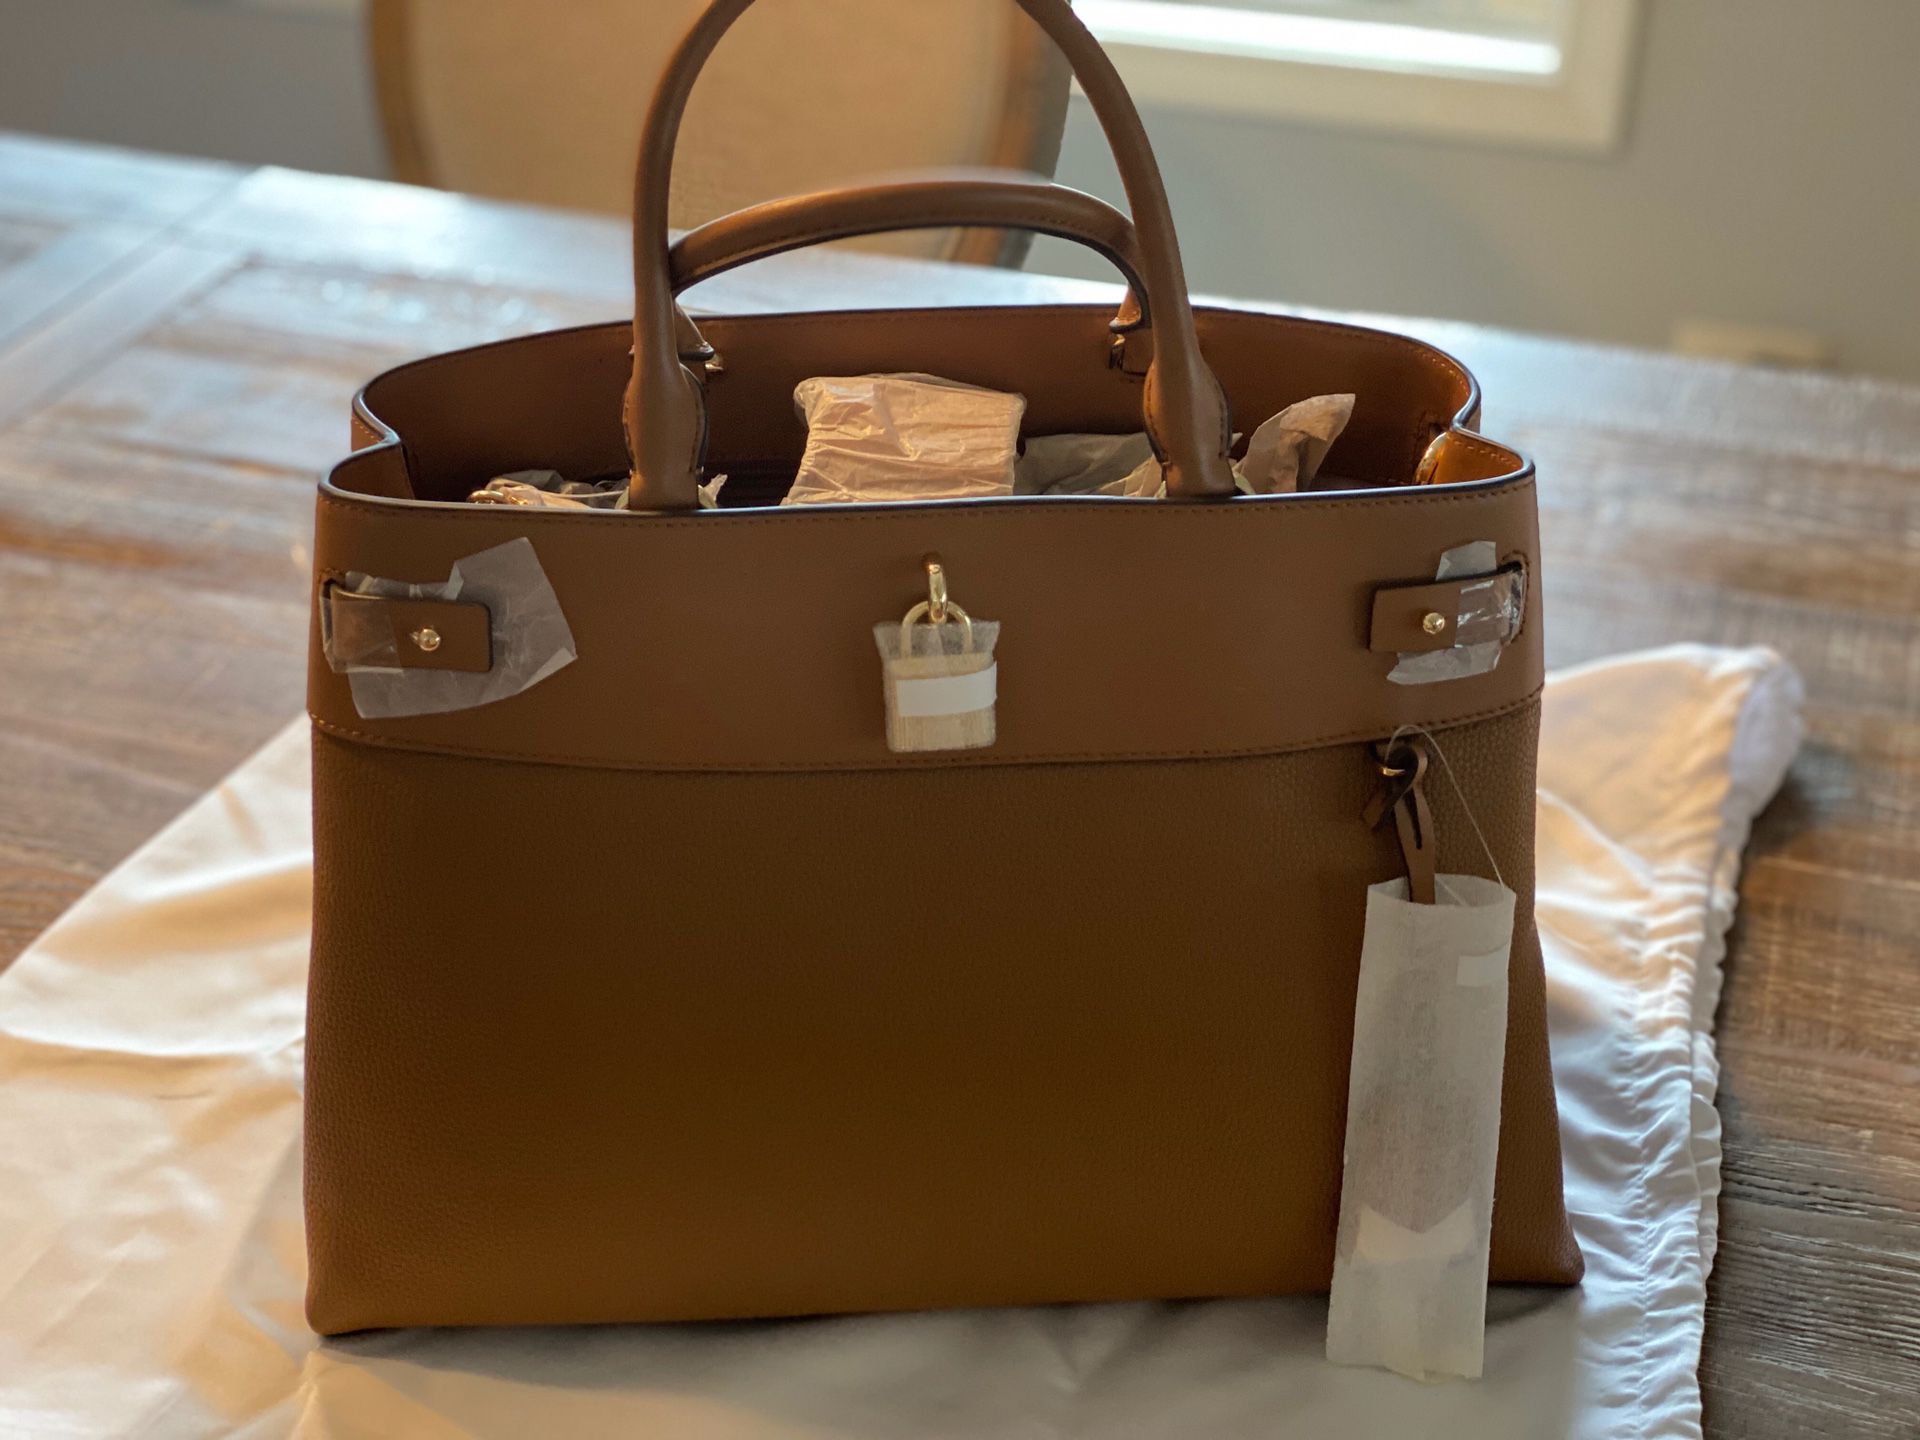 NWT Michael Kors Gramercy Large Leather